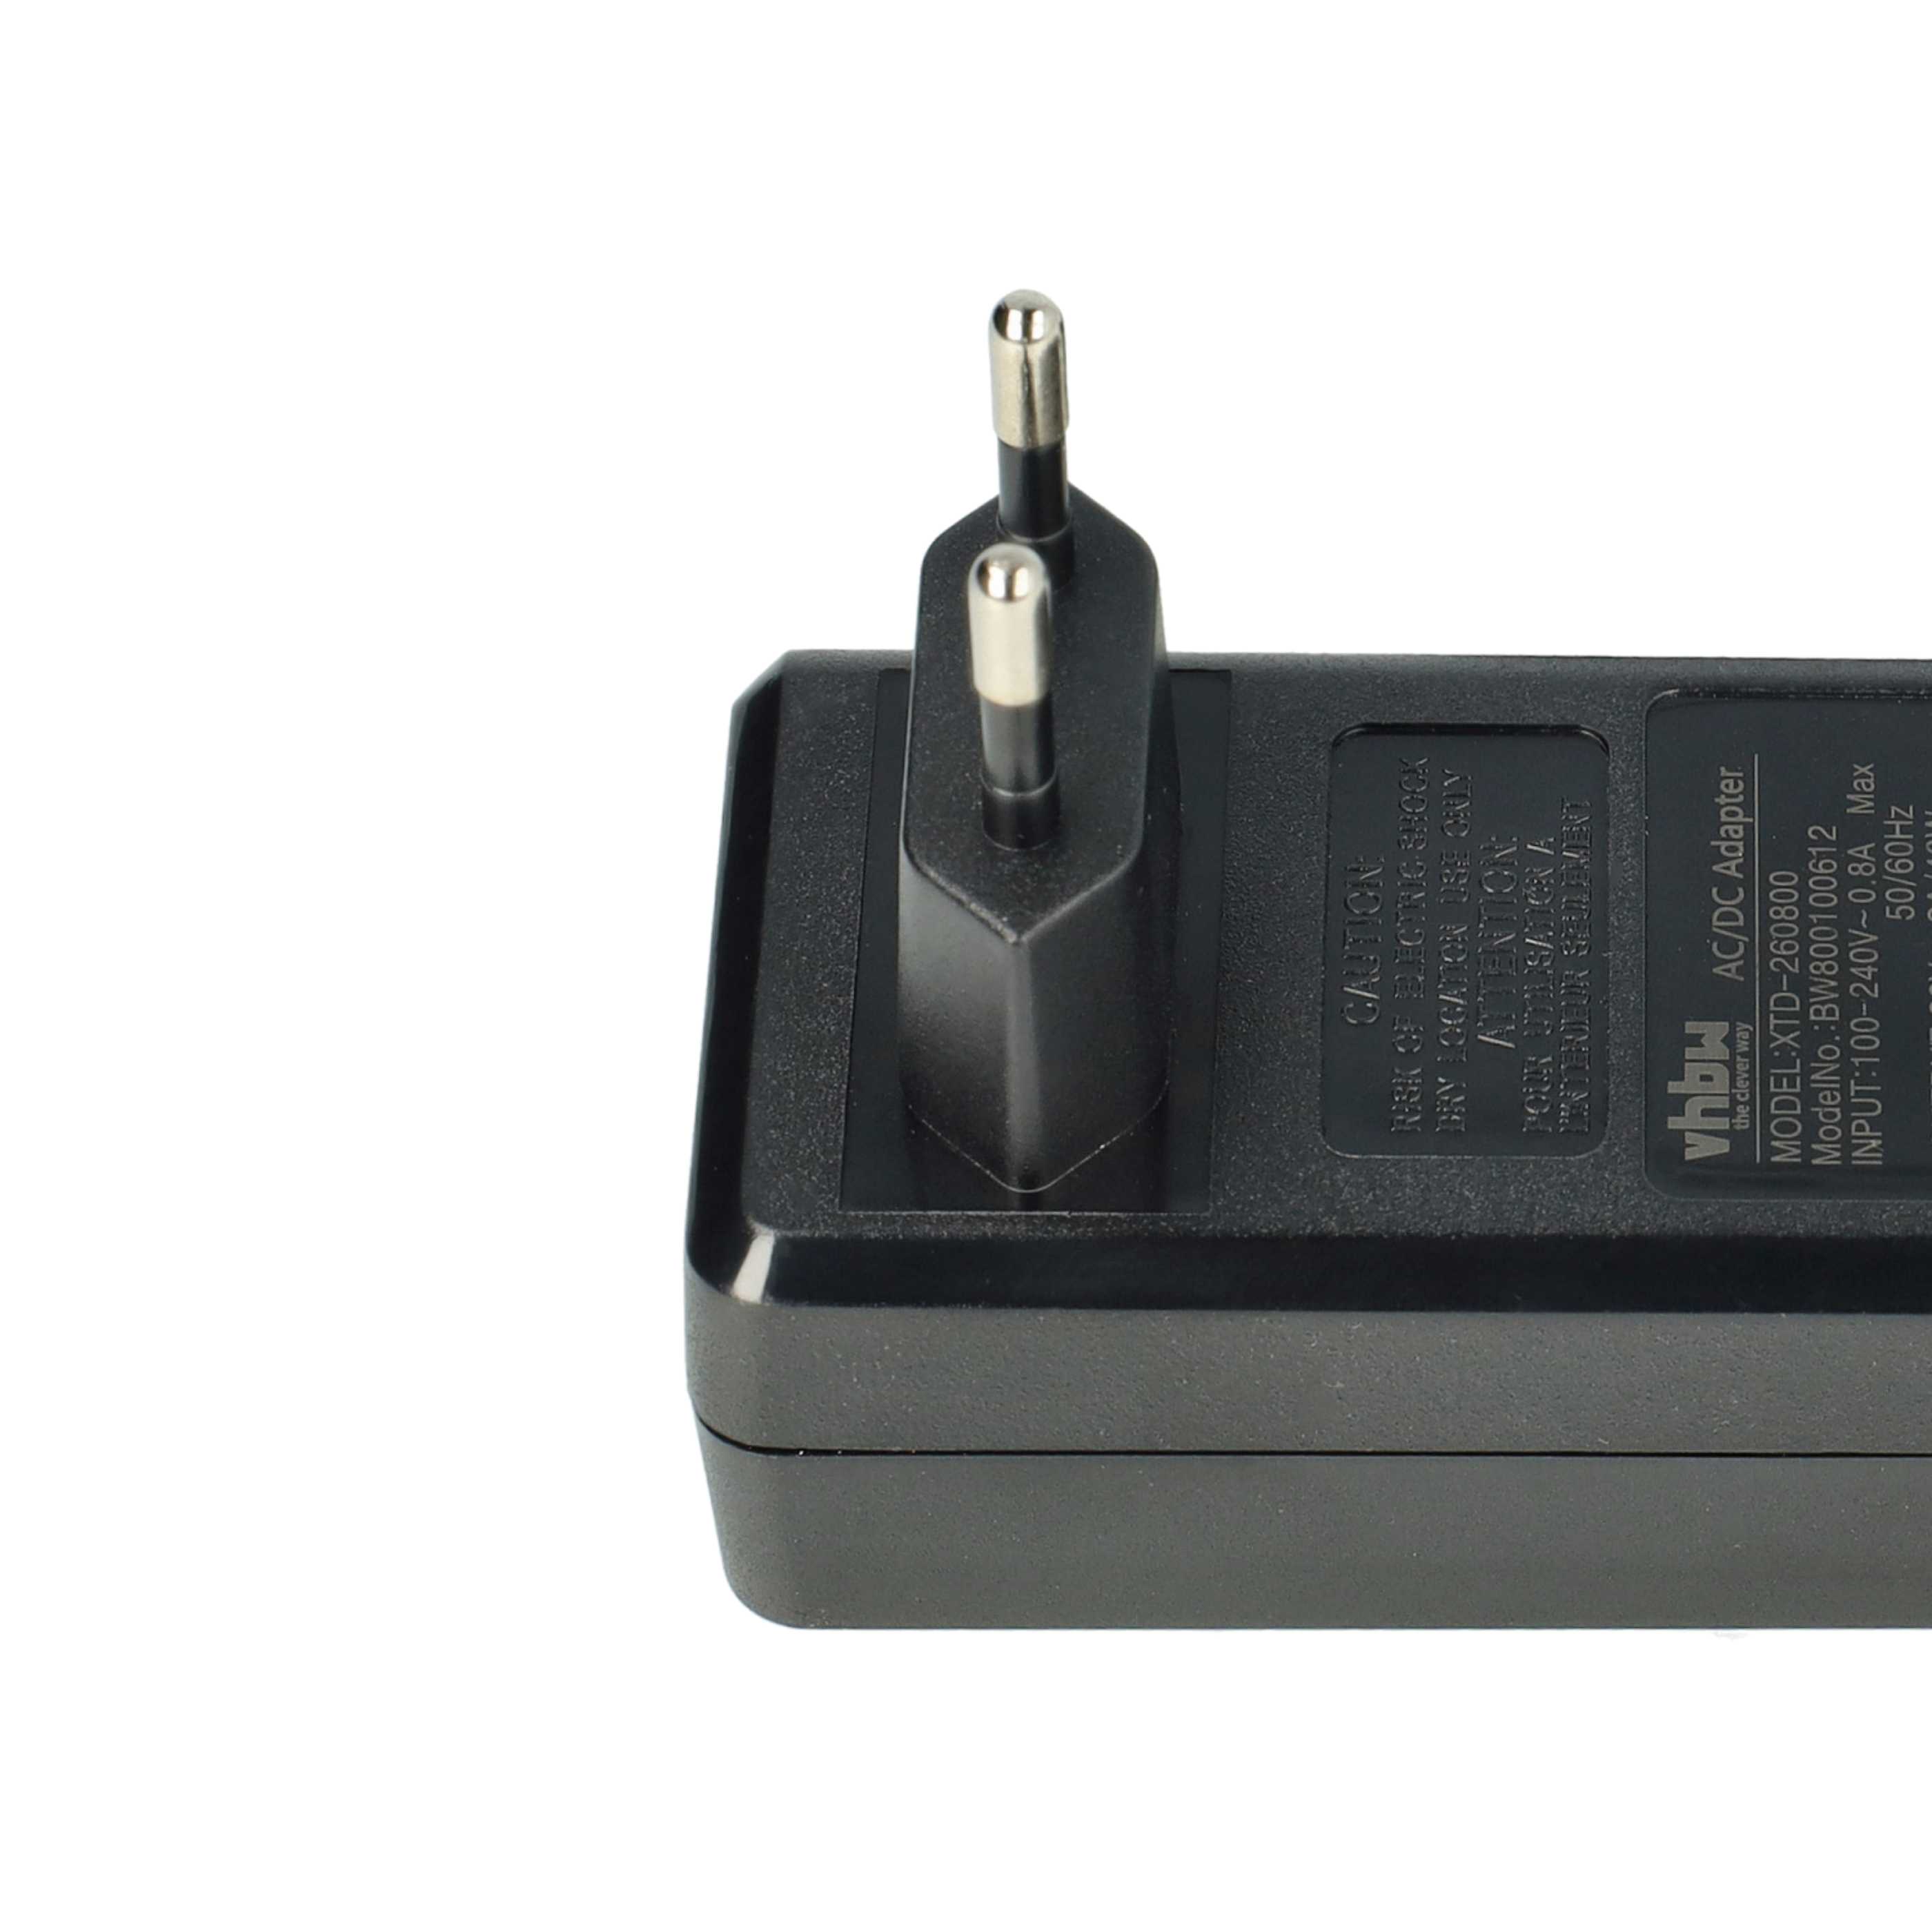 Mains Power Adapter replaces Medion 45K2200 for MedionNotebook, 40 W